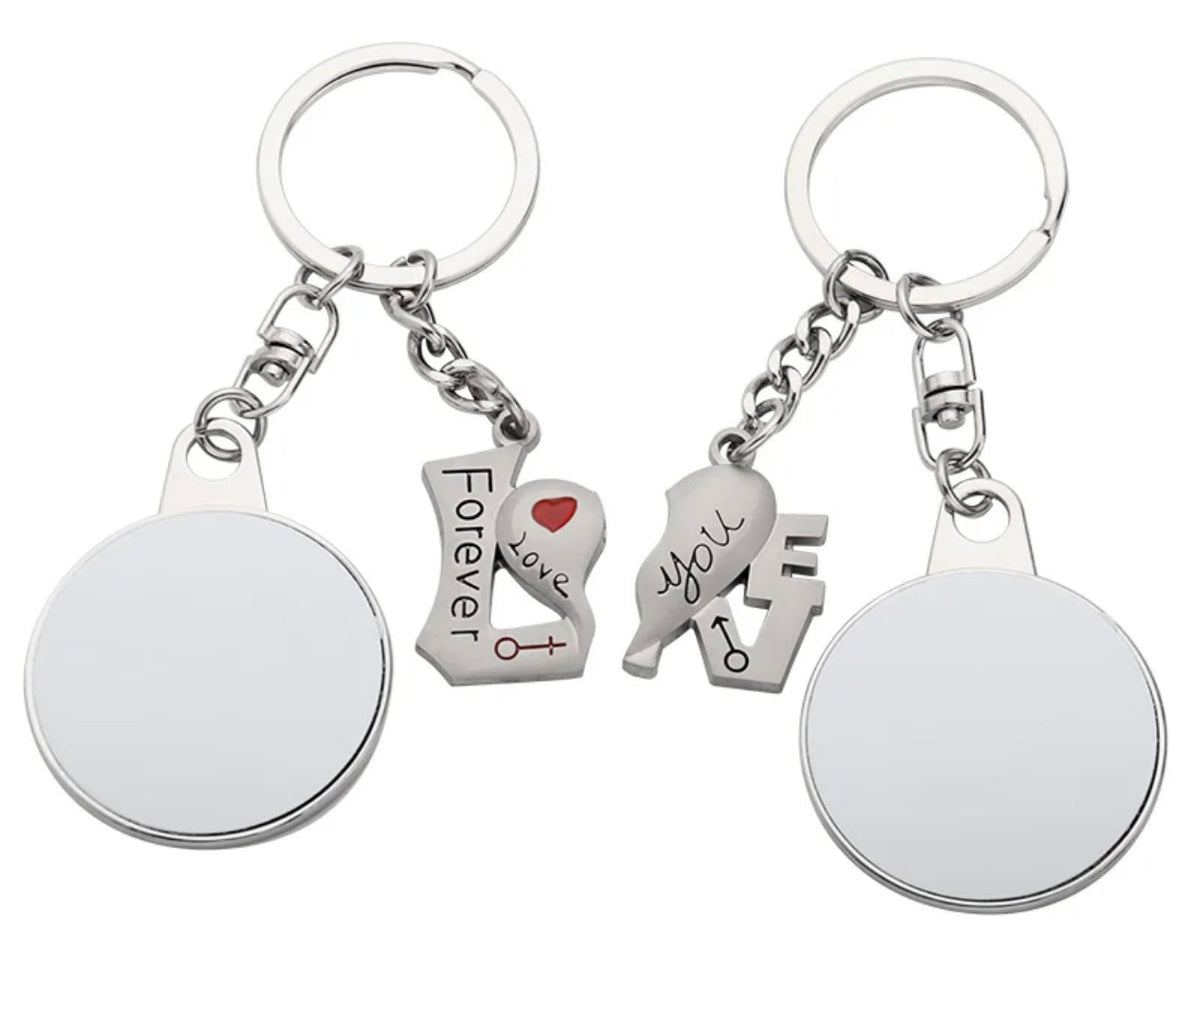 RENWILLS Sublimation Keychains Heart - Black